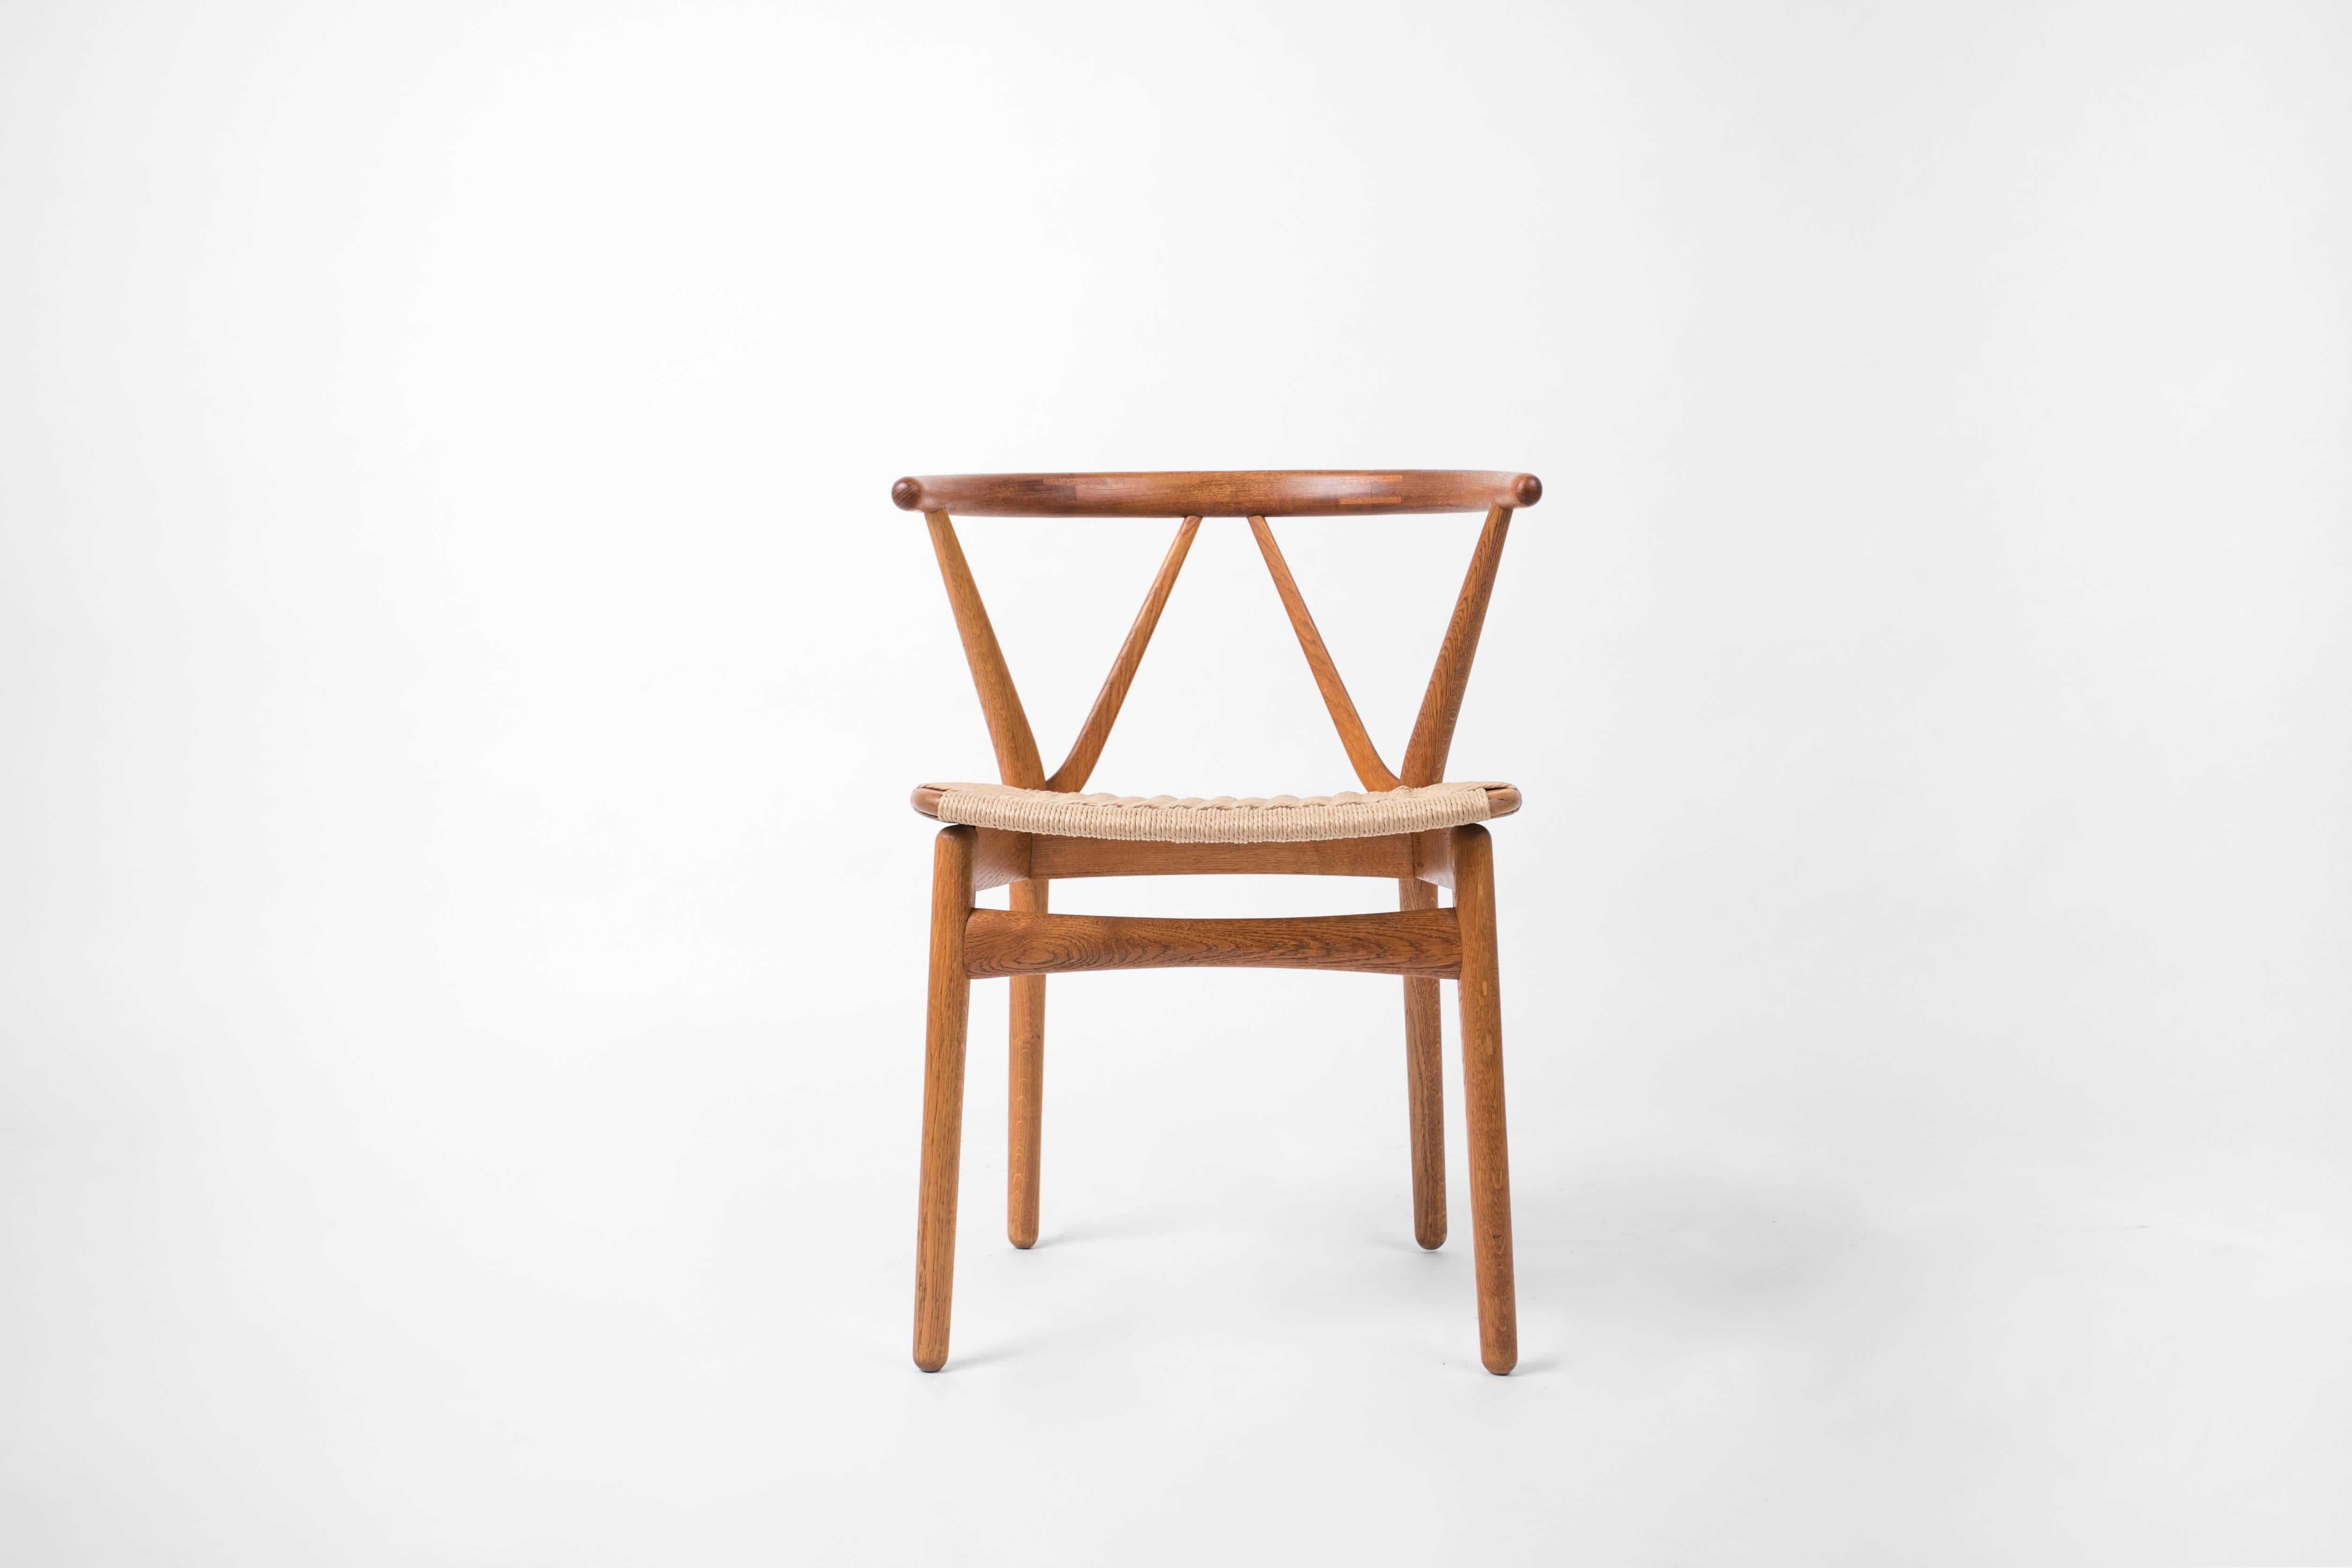 A set of six Danish modern dining chairs from Henning Kjaernulf, produced by Bruno Hansen. Constructed in teak, with woven fibre rush (also known as paper cord) seat, the curved backrest and angled supports of this design are reminiscent of Hans